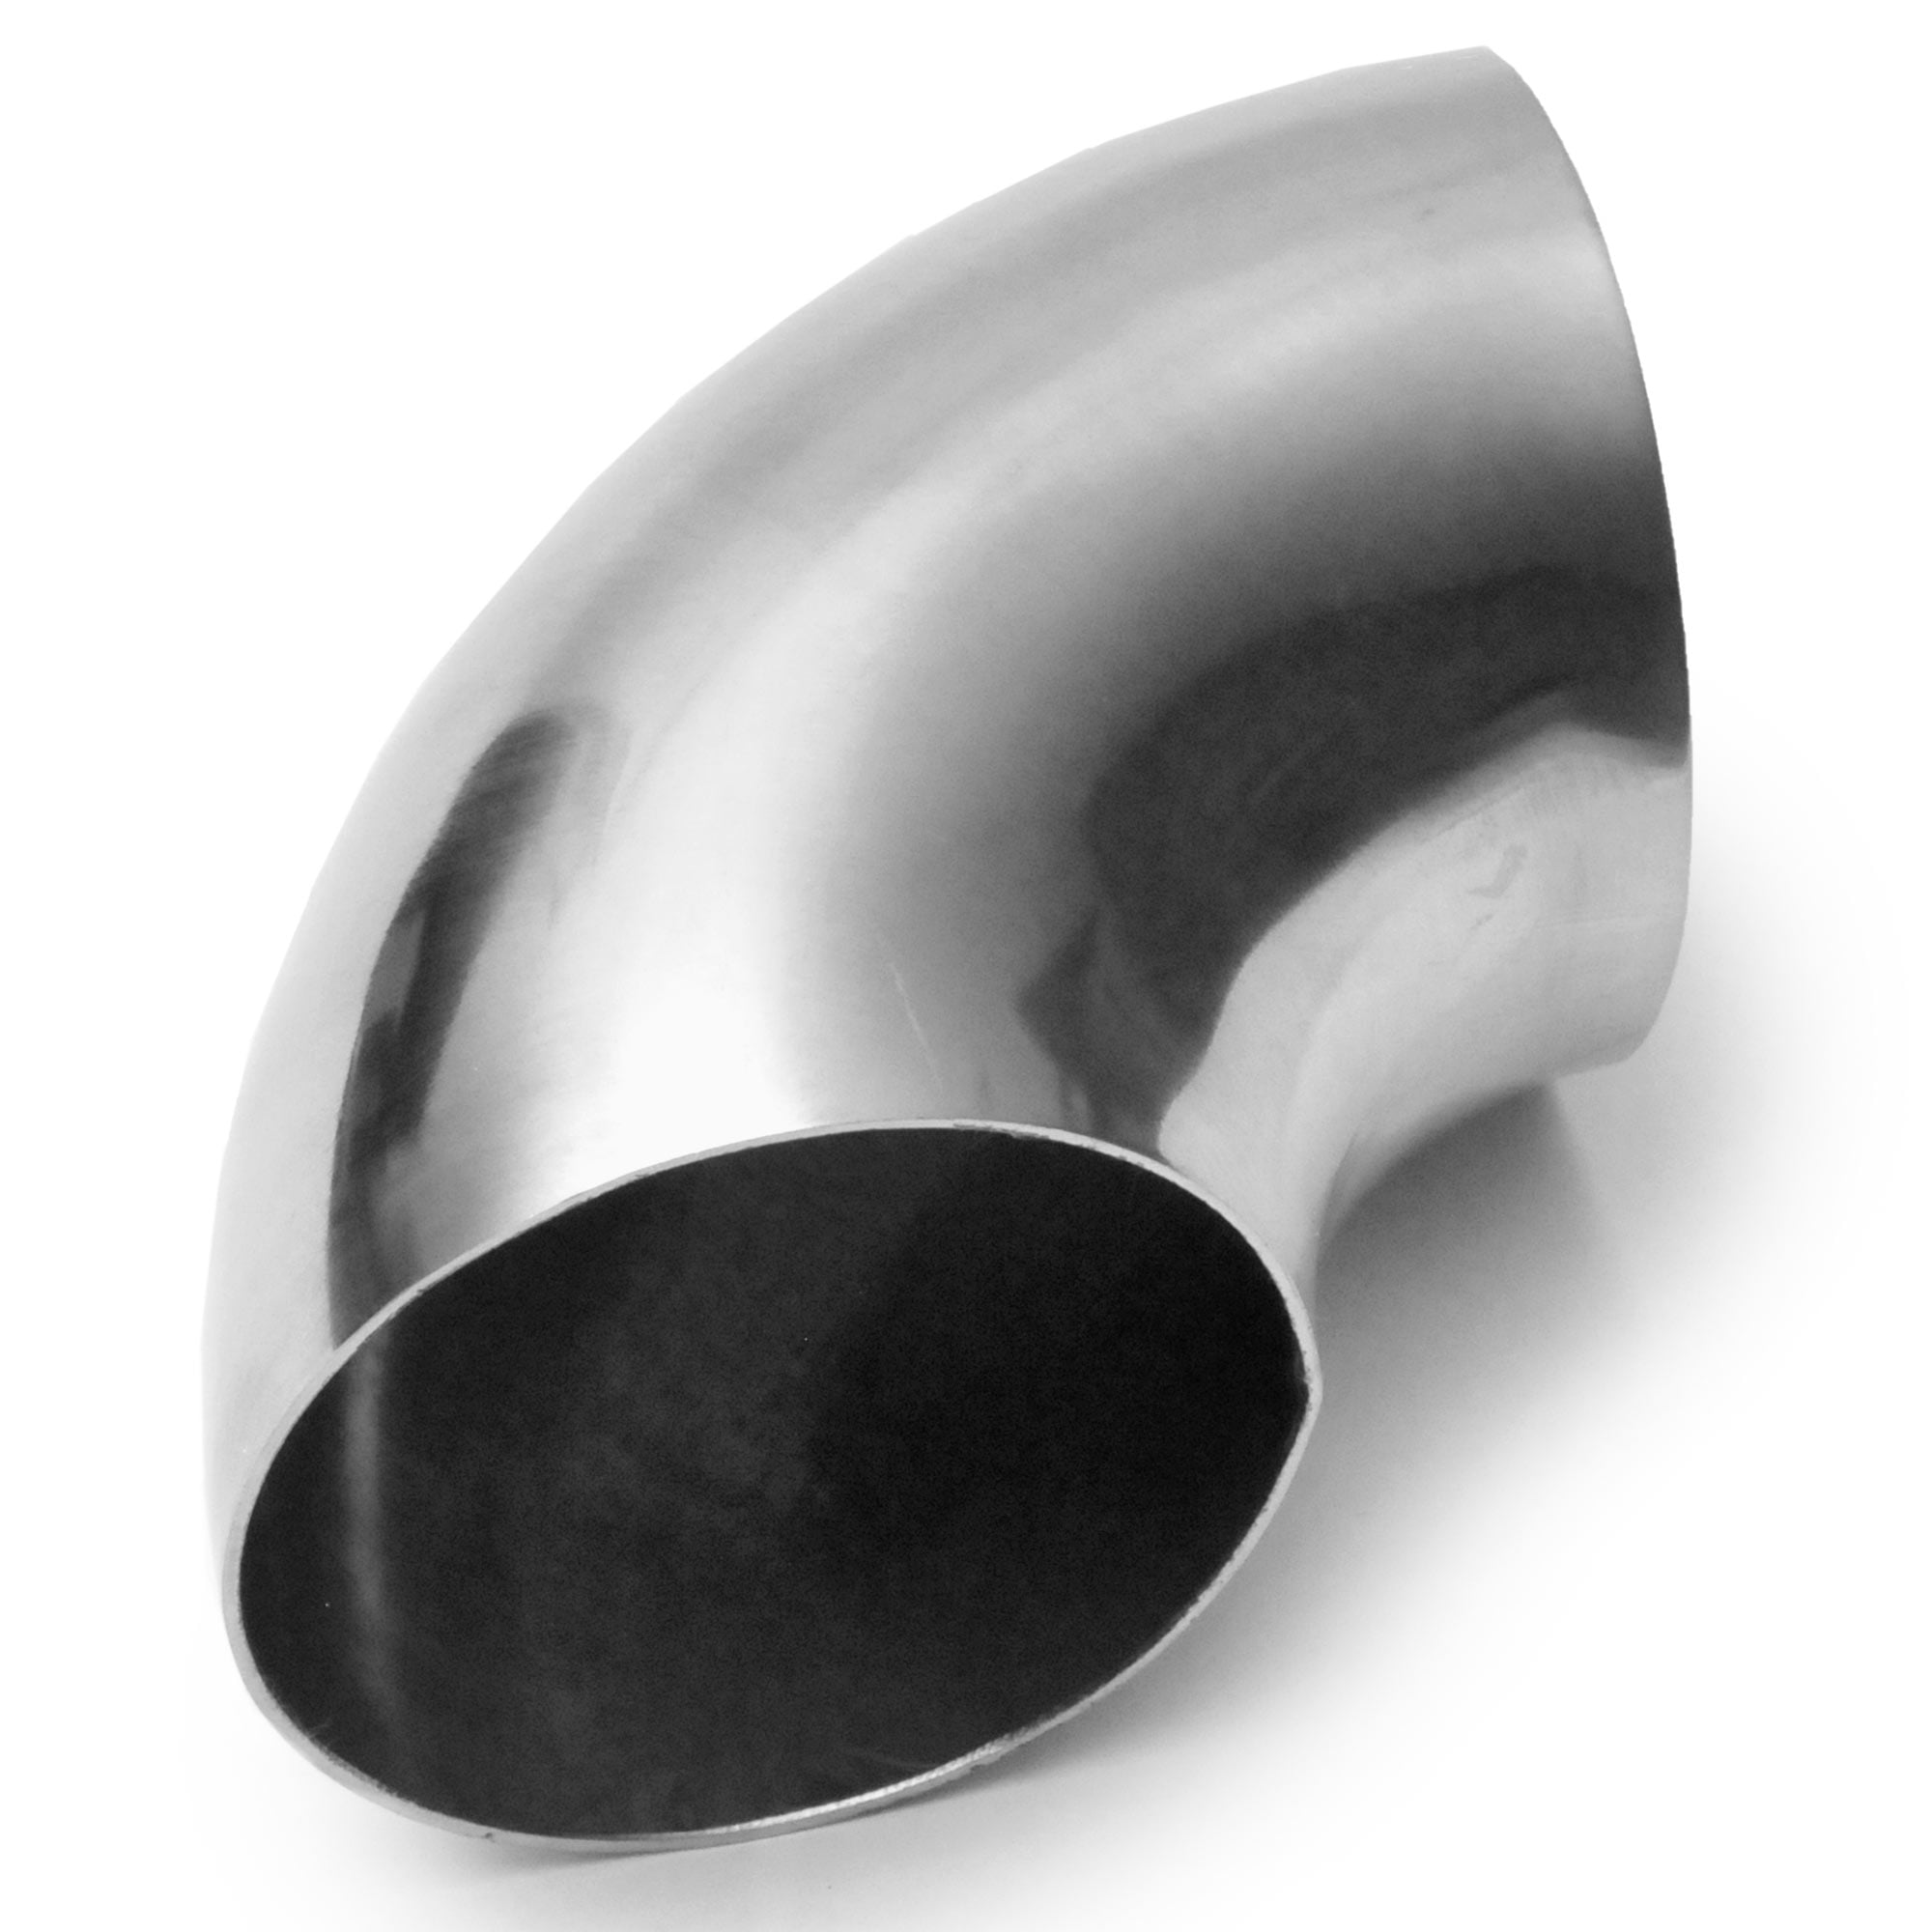 Polished Finish Metal Pipe Bends T304 Stainless Steel 90° Degree Elbows 